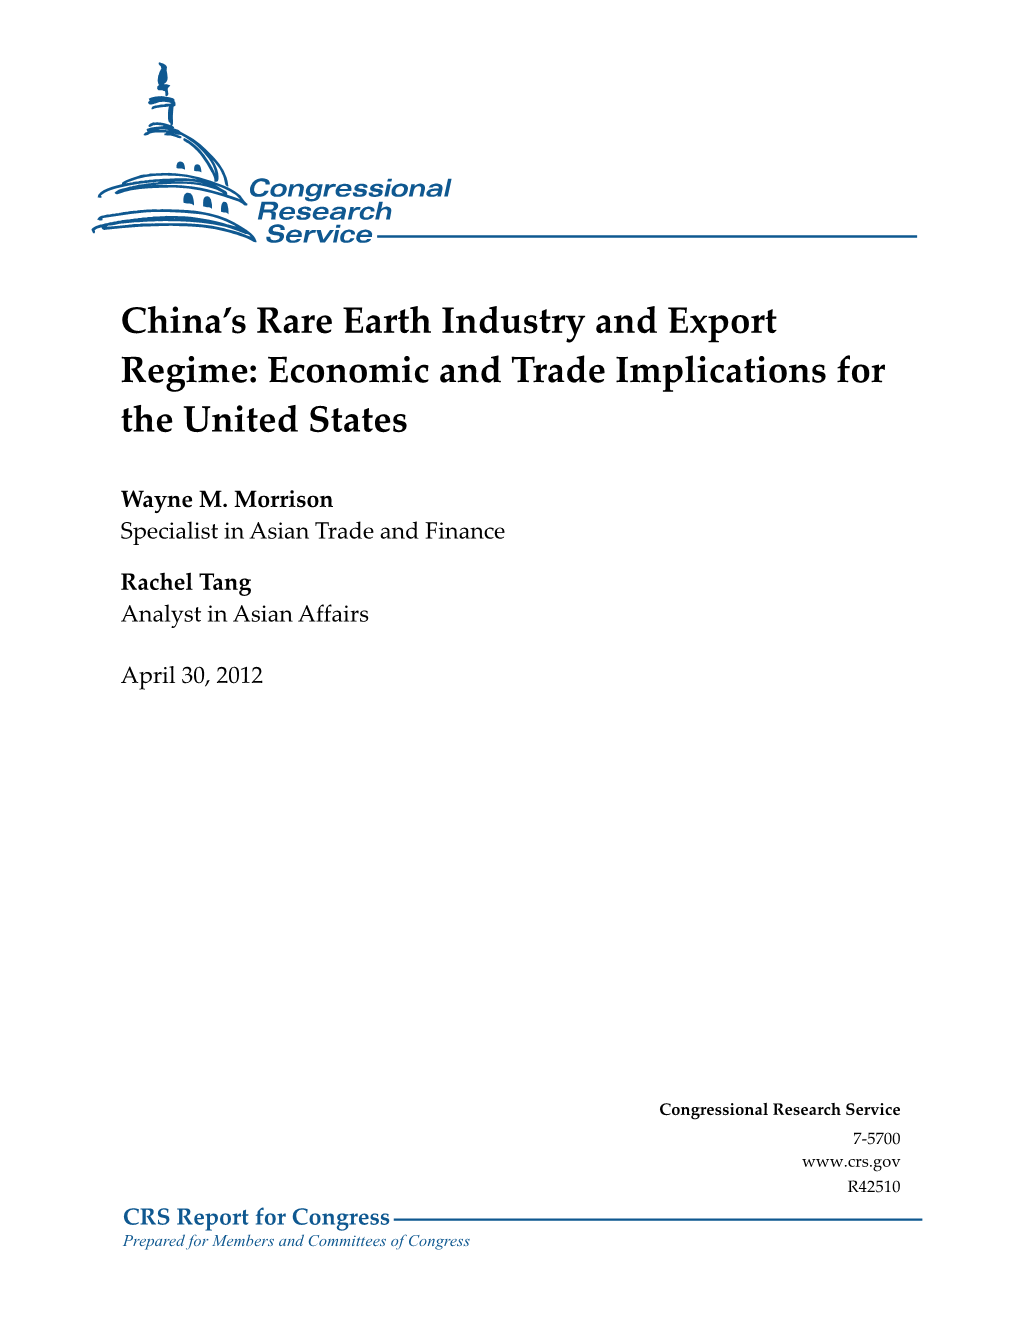 China's Rare Earth Industry and Export Regime: Economic and Trade Implications for the United States